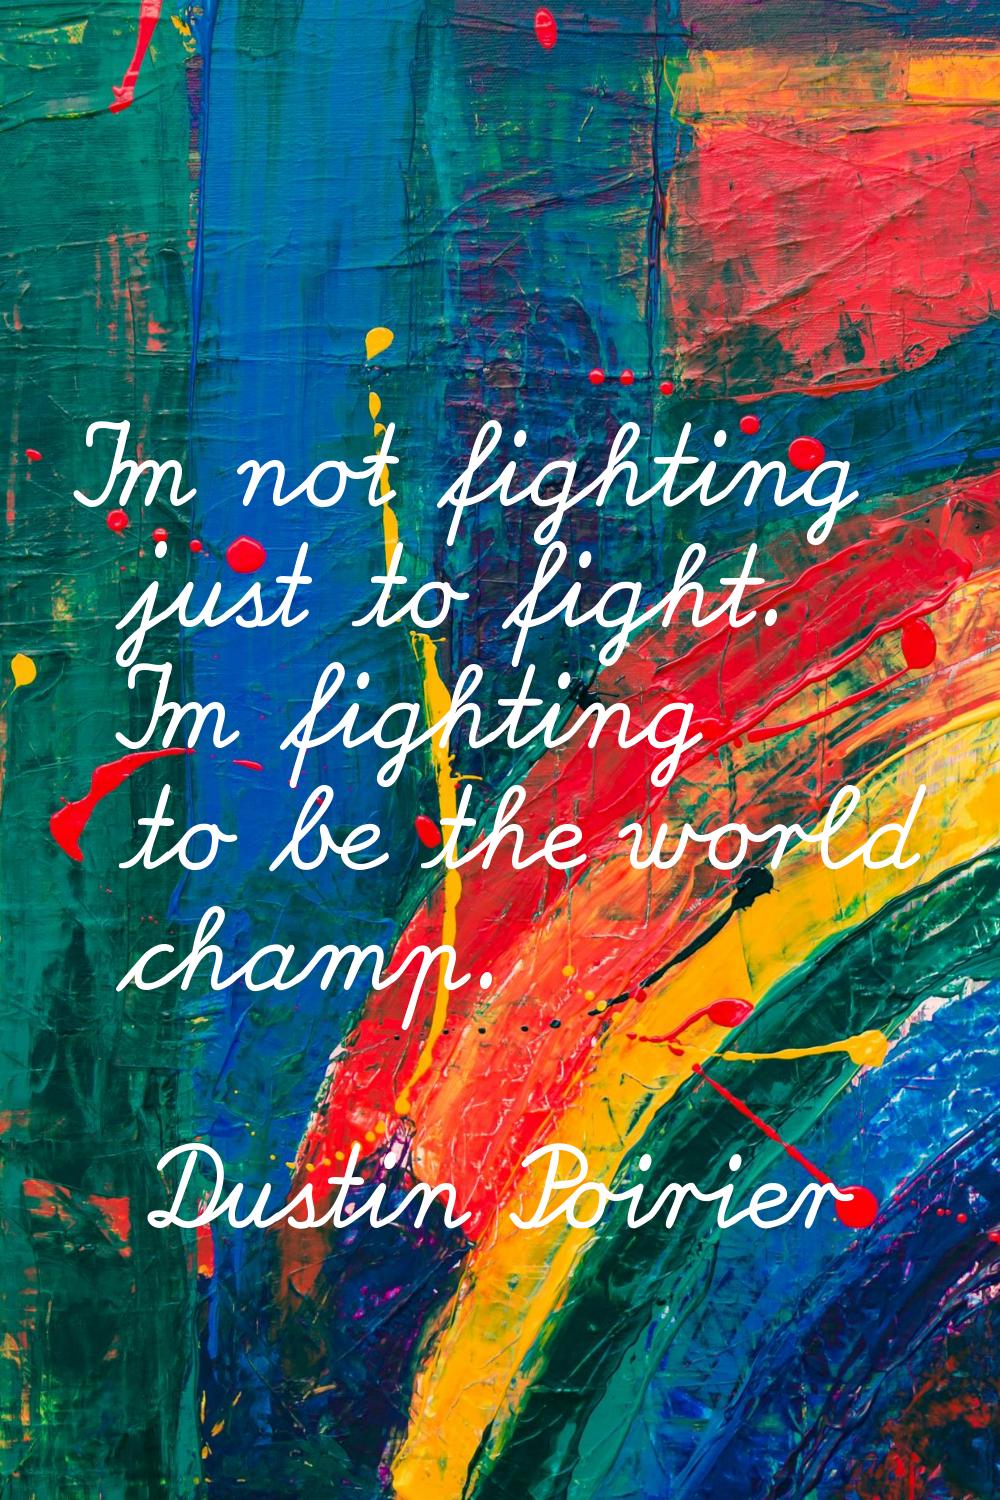 I'm not fighting just to fight. I'm fighting to be the world champ.